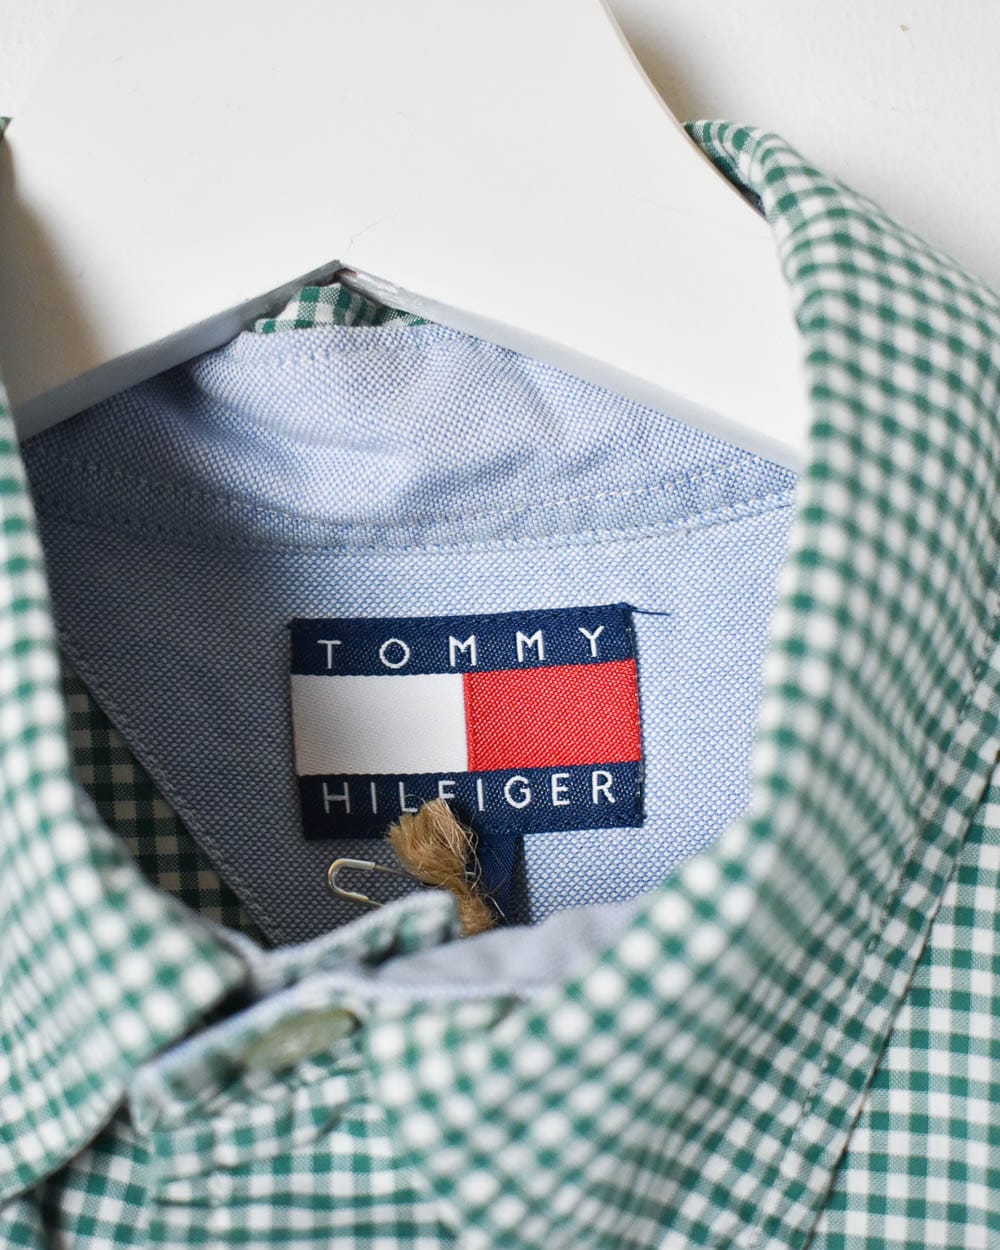 Green Tommy Hilfiger Checked Shirt - Small